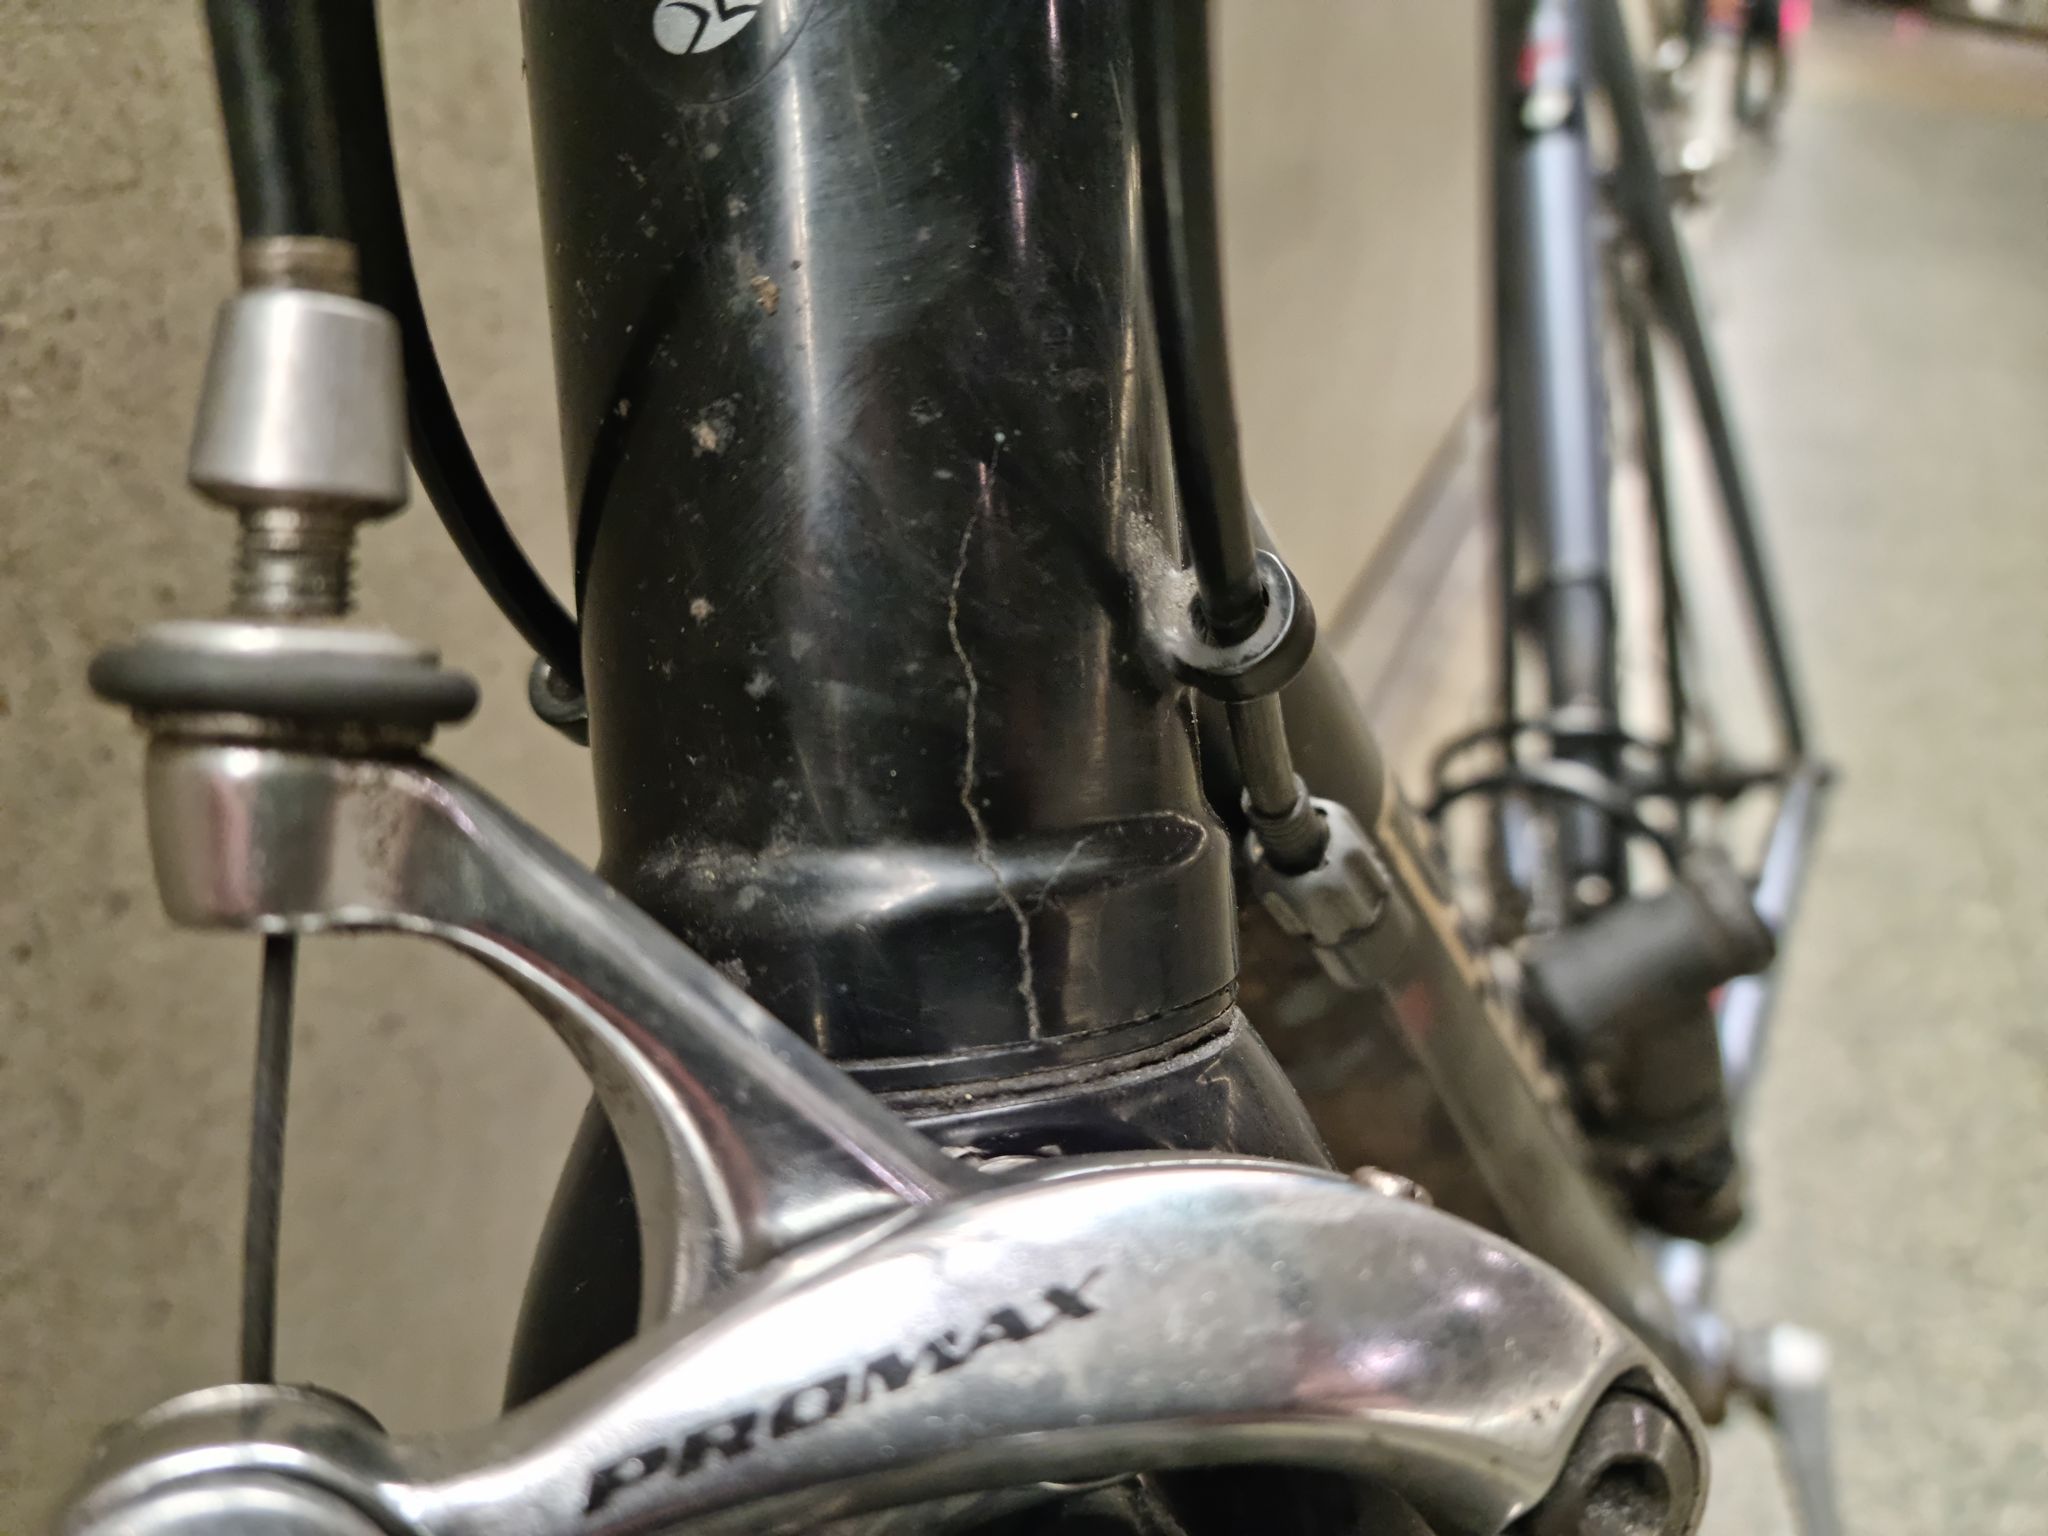 Crack in the front tube